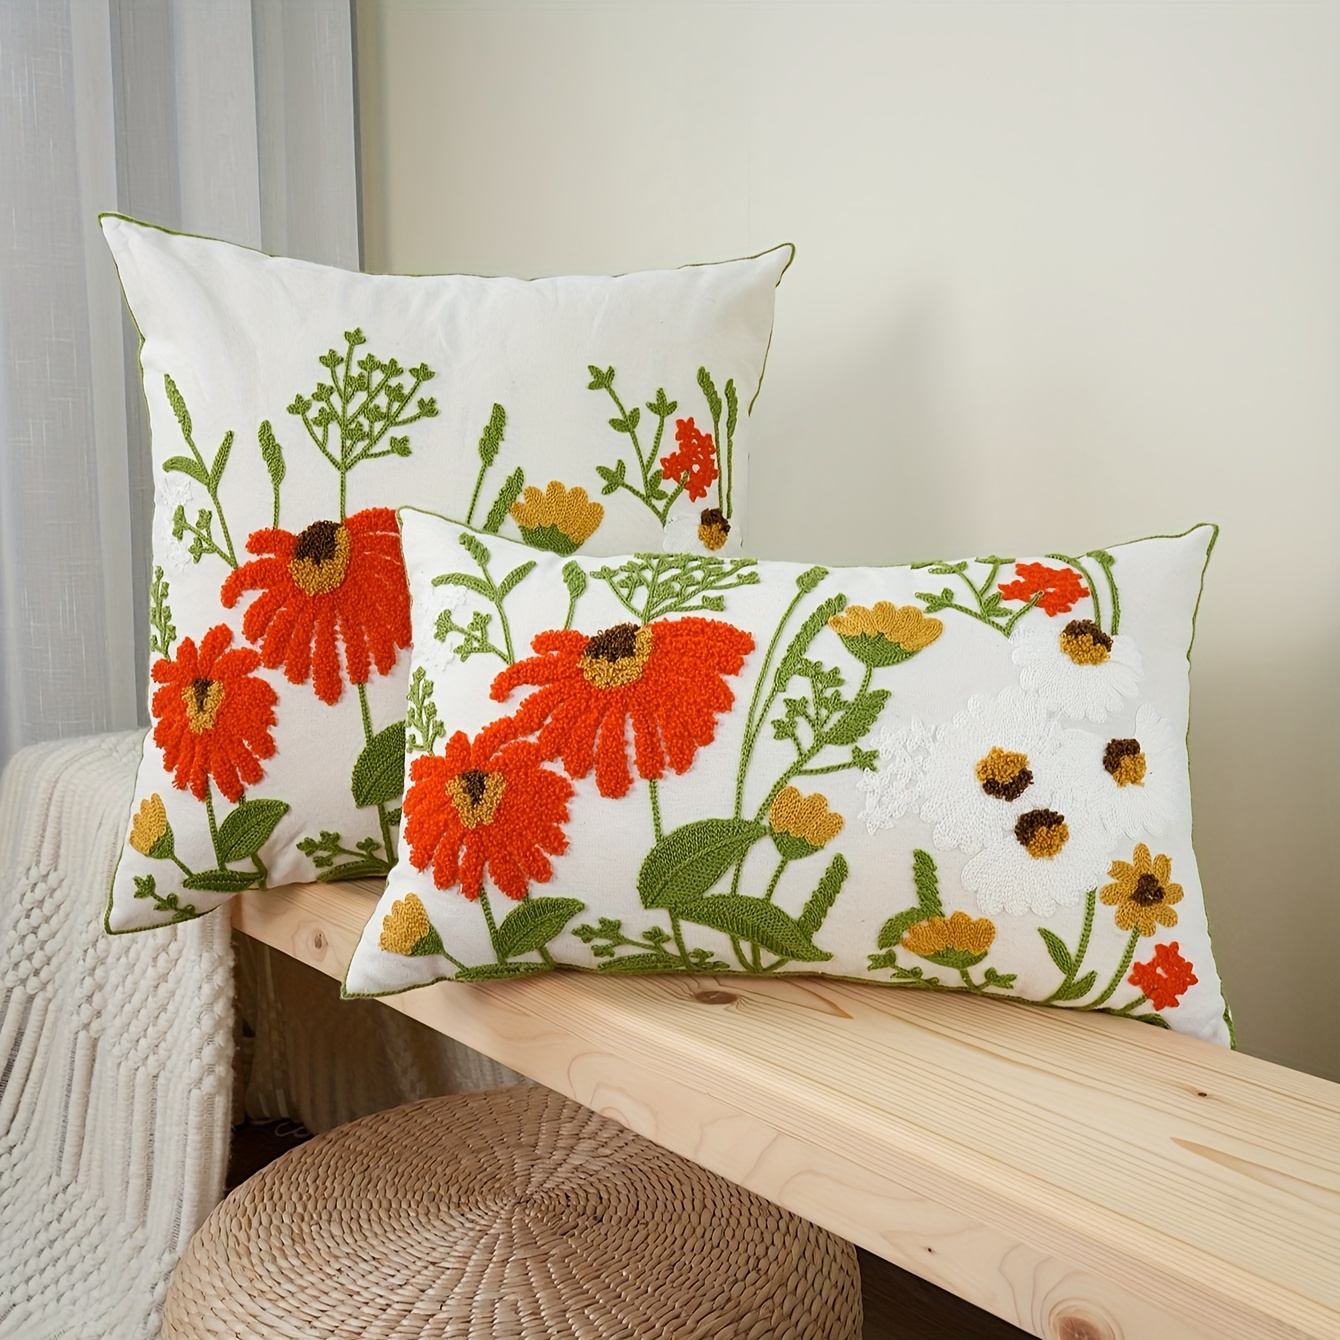 Cotton Canvas Floral Embroiderey Cushion Cover 45x45 Pillow Cover